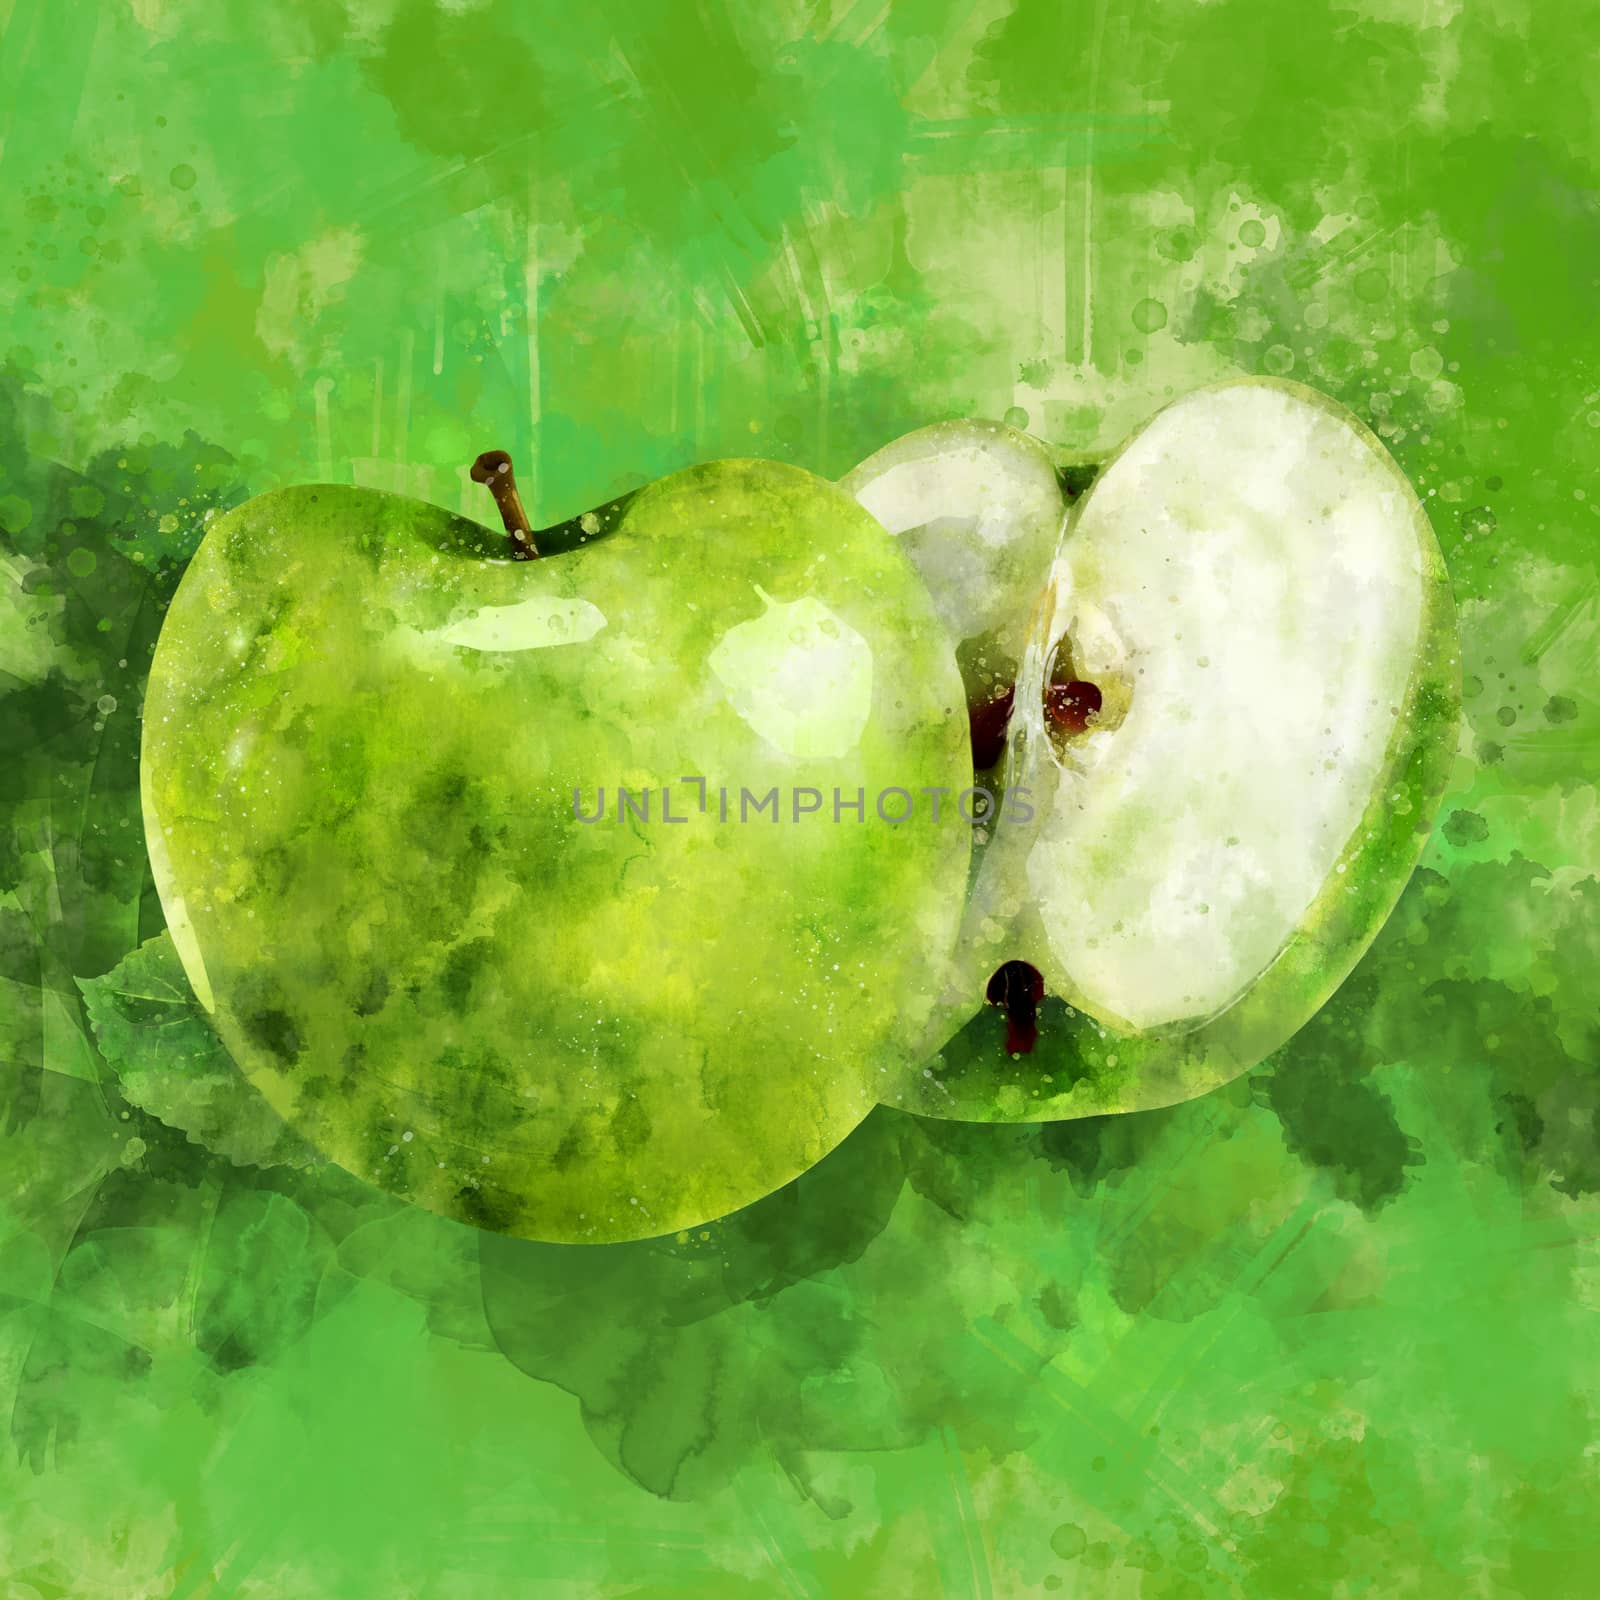 Green Apple, hand-painted illustration on green background